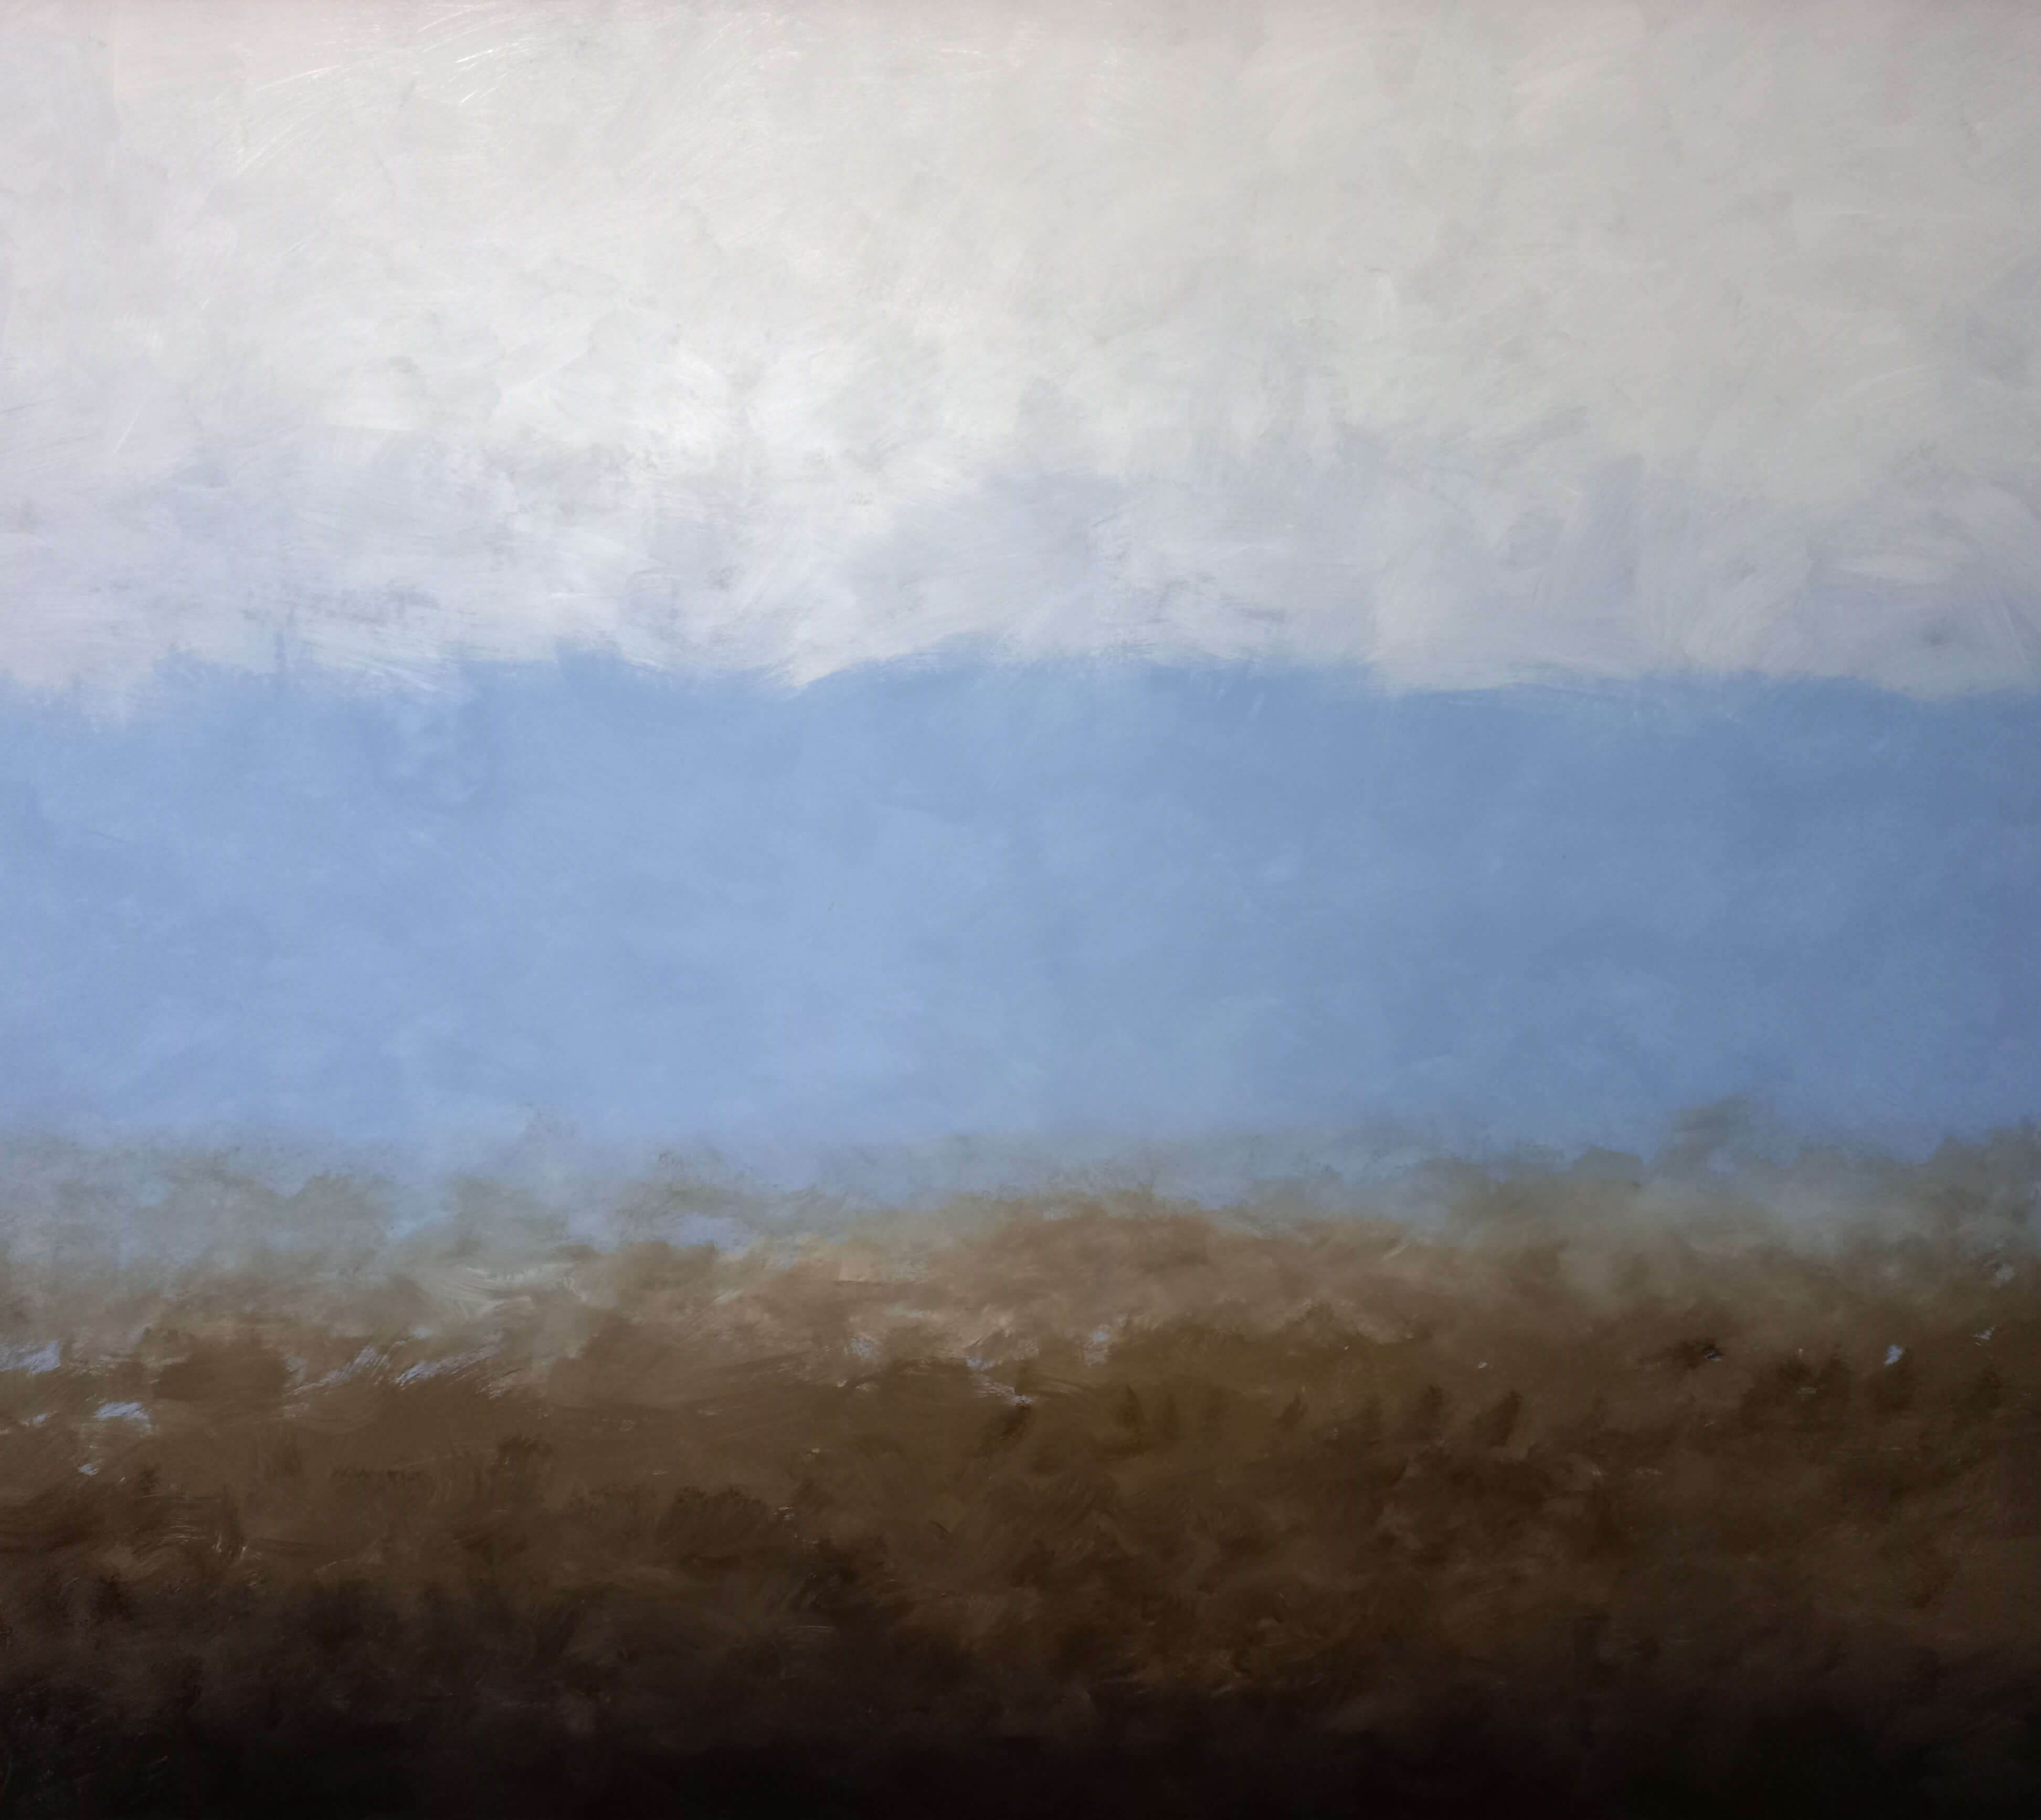 Background of Dawie Mocke's artwork of a blue sky with clouds and dark ground.